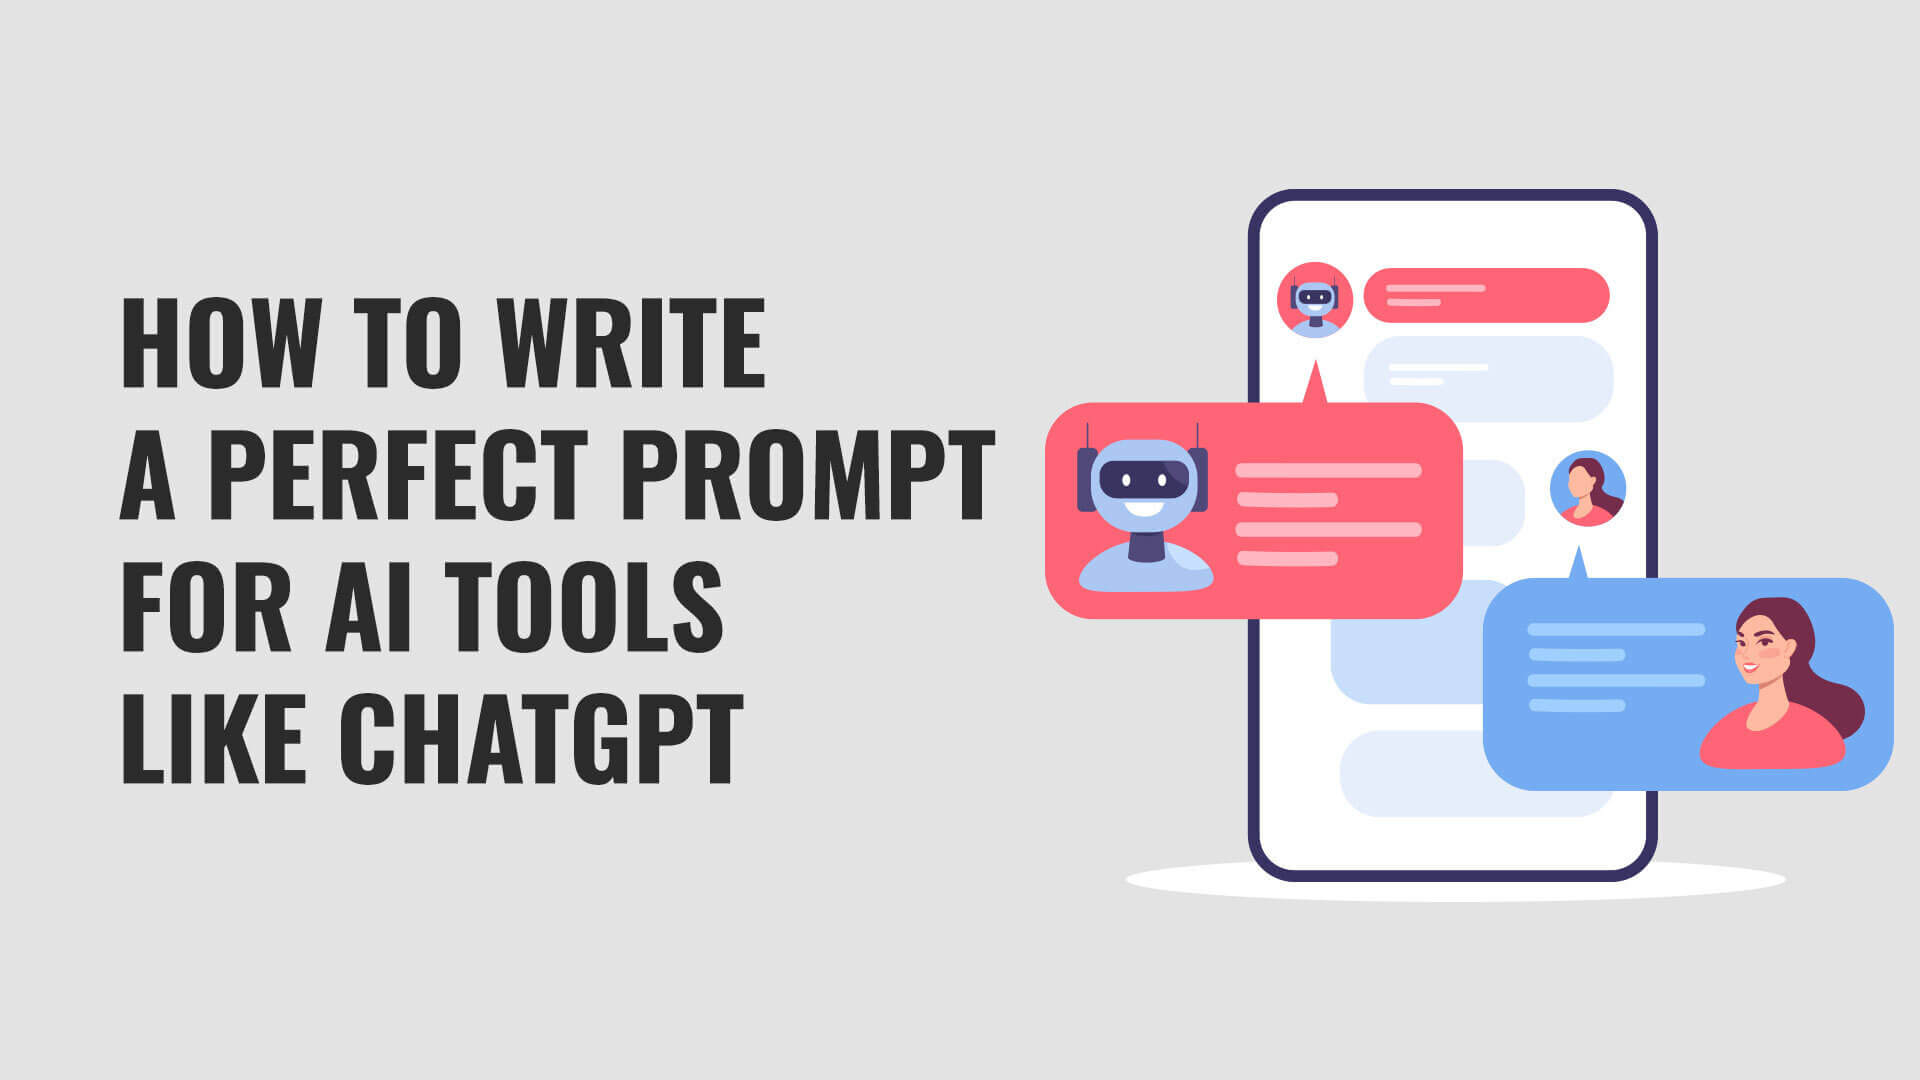 How to Write a Perfect Prompt for AI Tools Like ChatGPT and Become a Successful Prompt Engineer